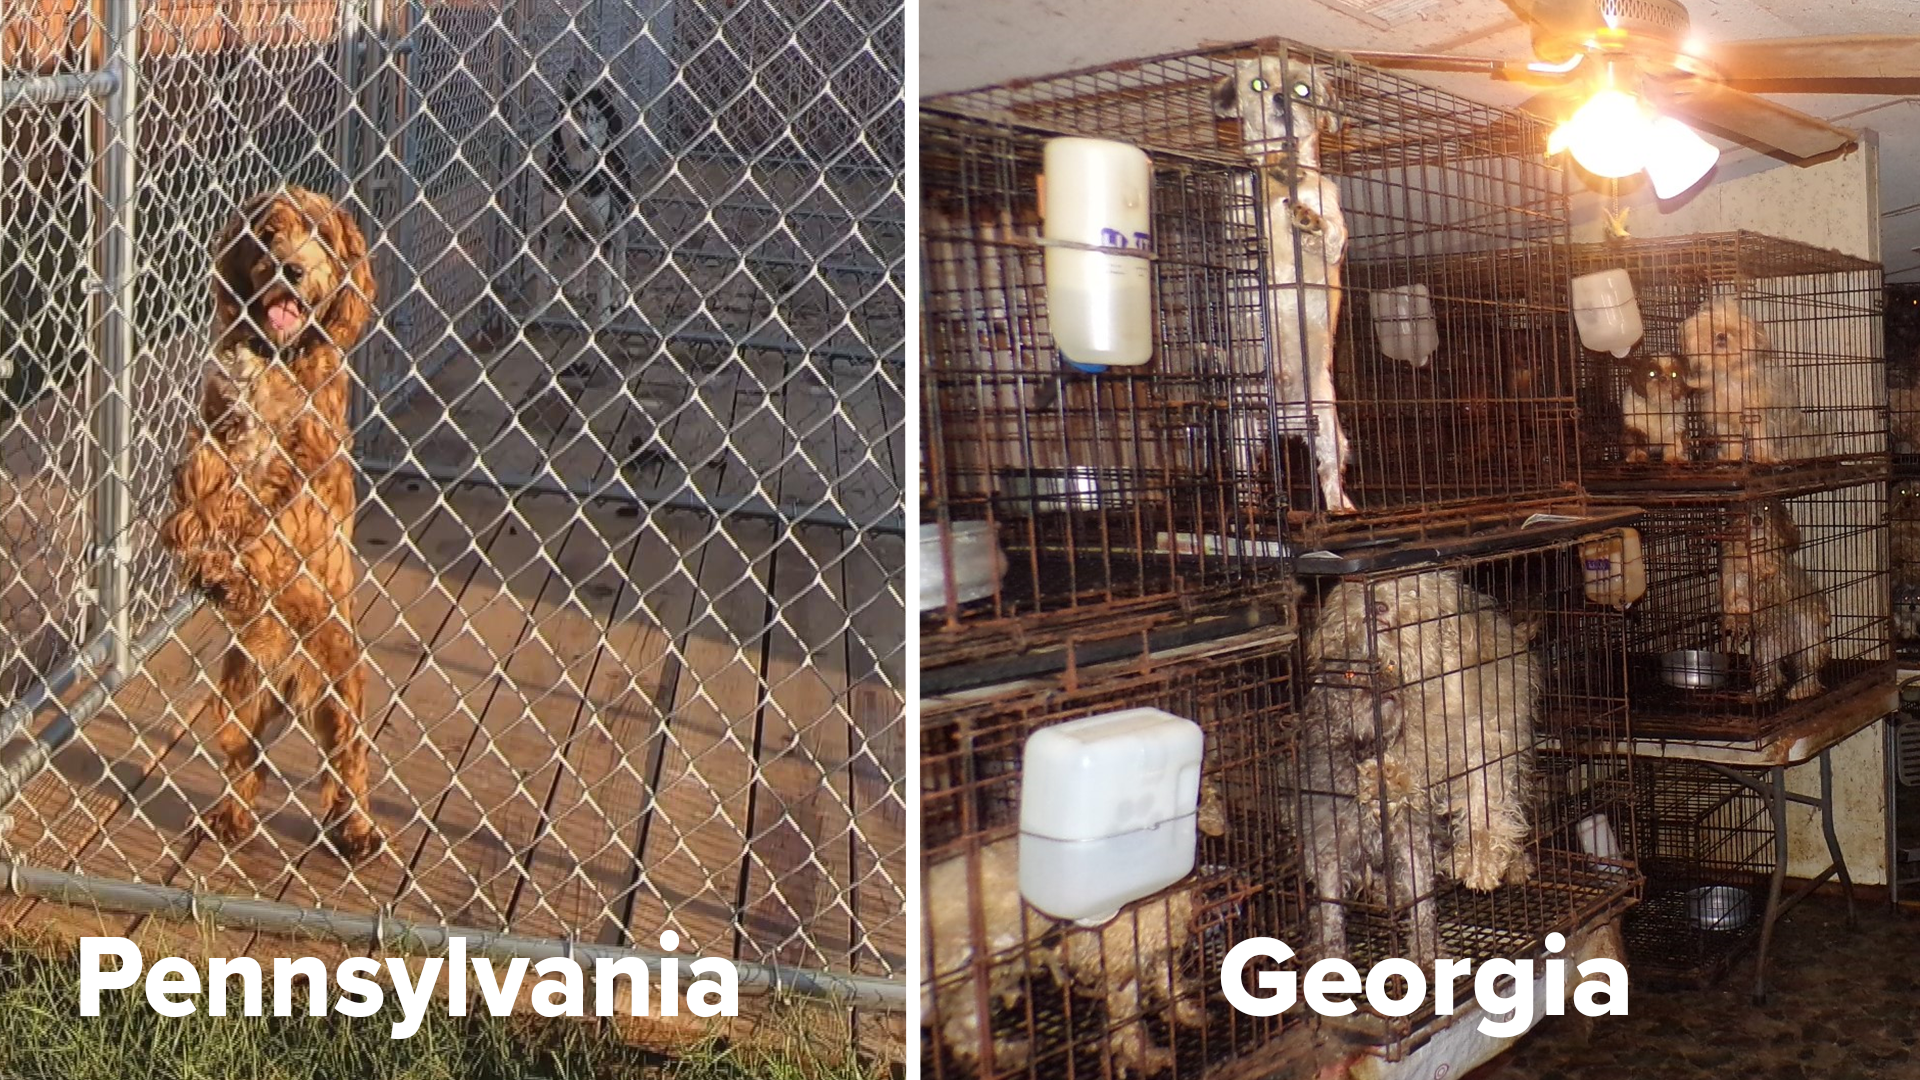 Our investigation took us to the puppy mill capital of the country to see what steps Pa. lawmakers are taking to help protect animals.